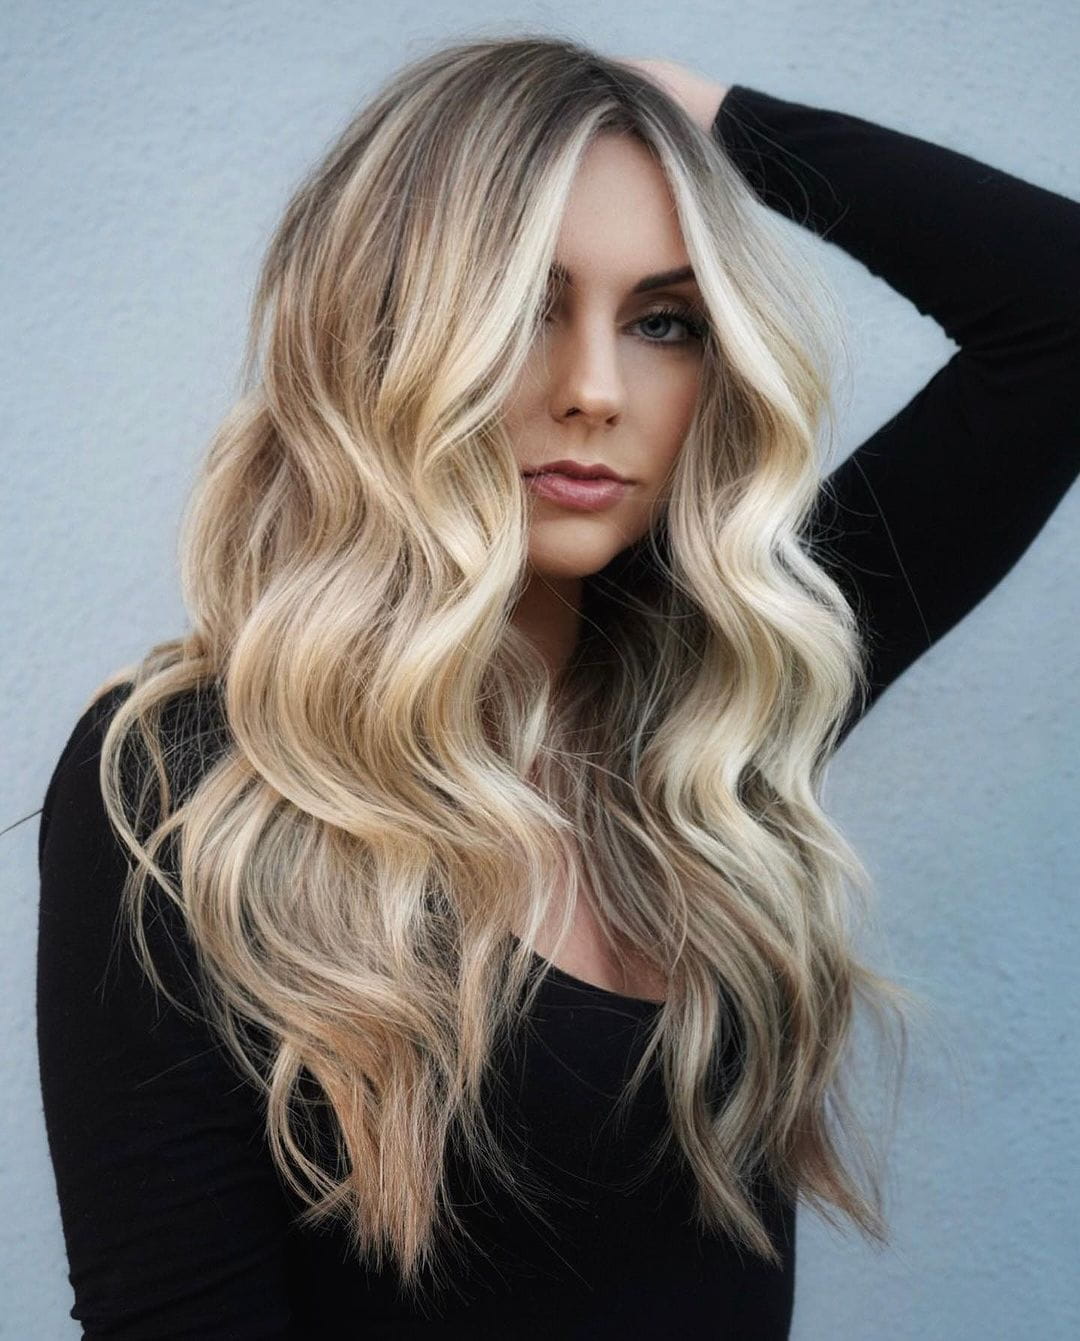 100+ Hairstyle And Hair Colors For Winter That Are Trending images 38